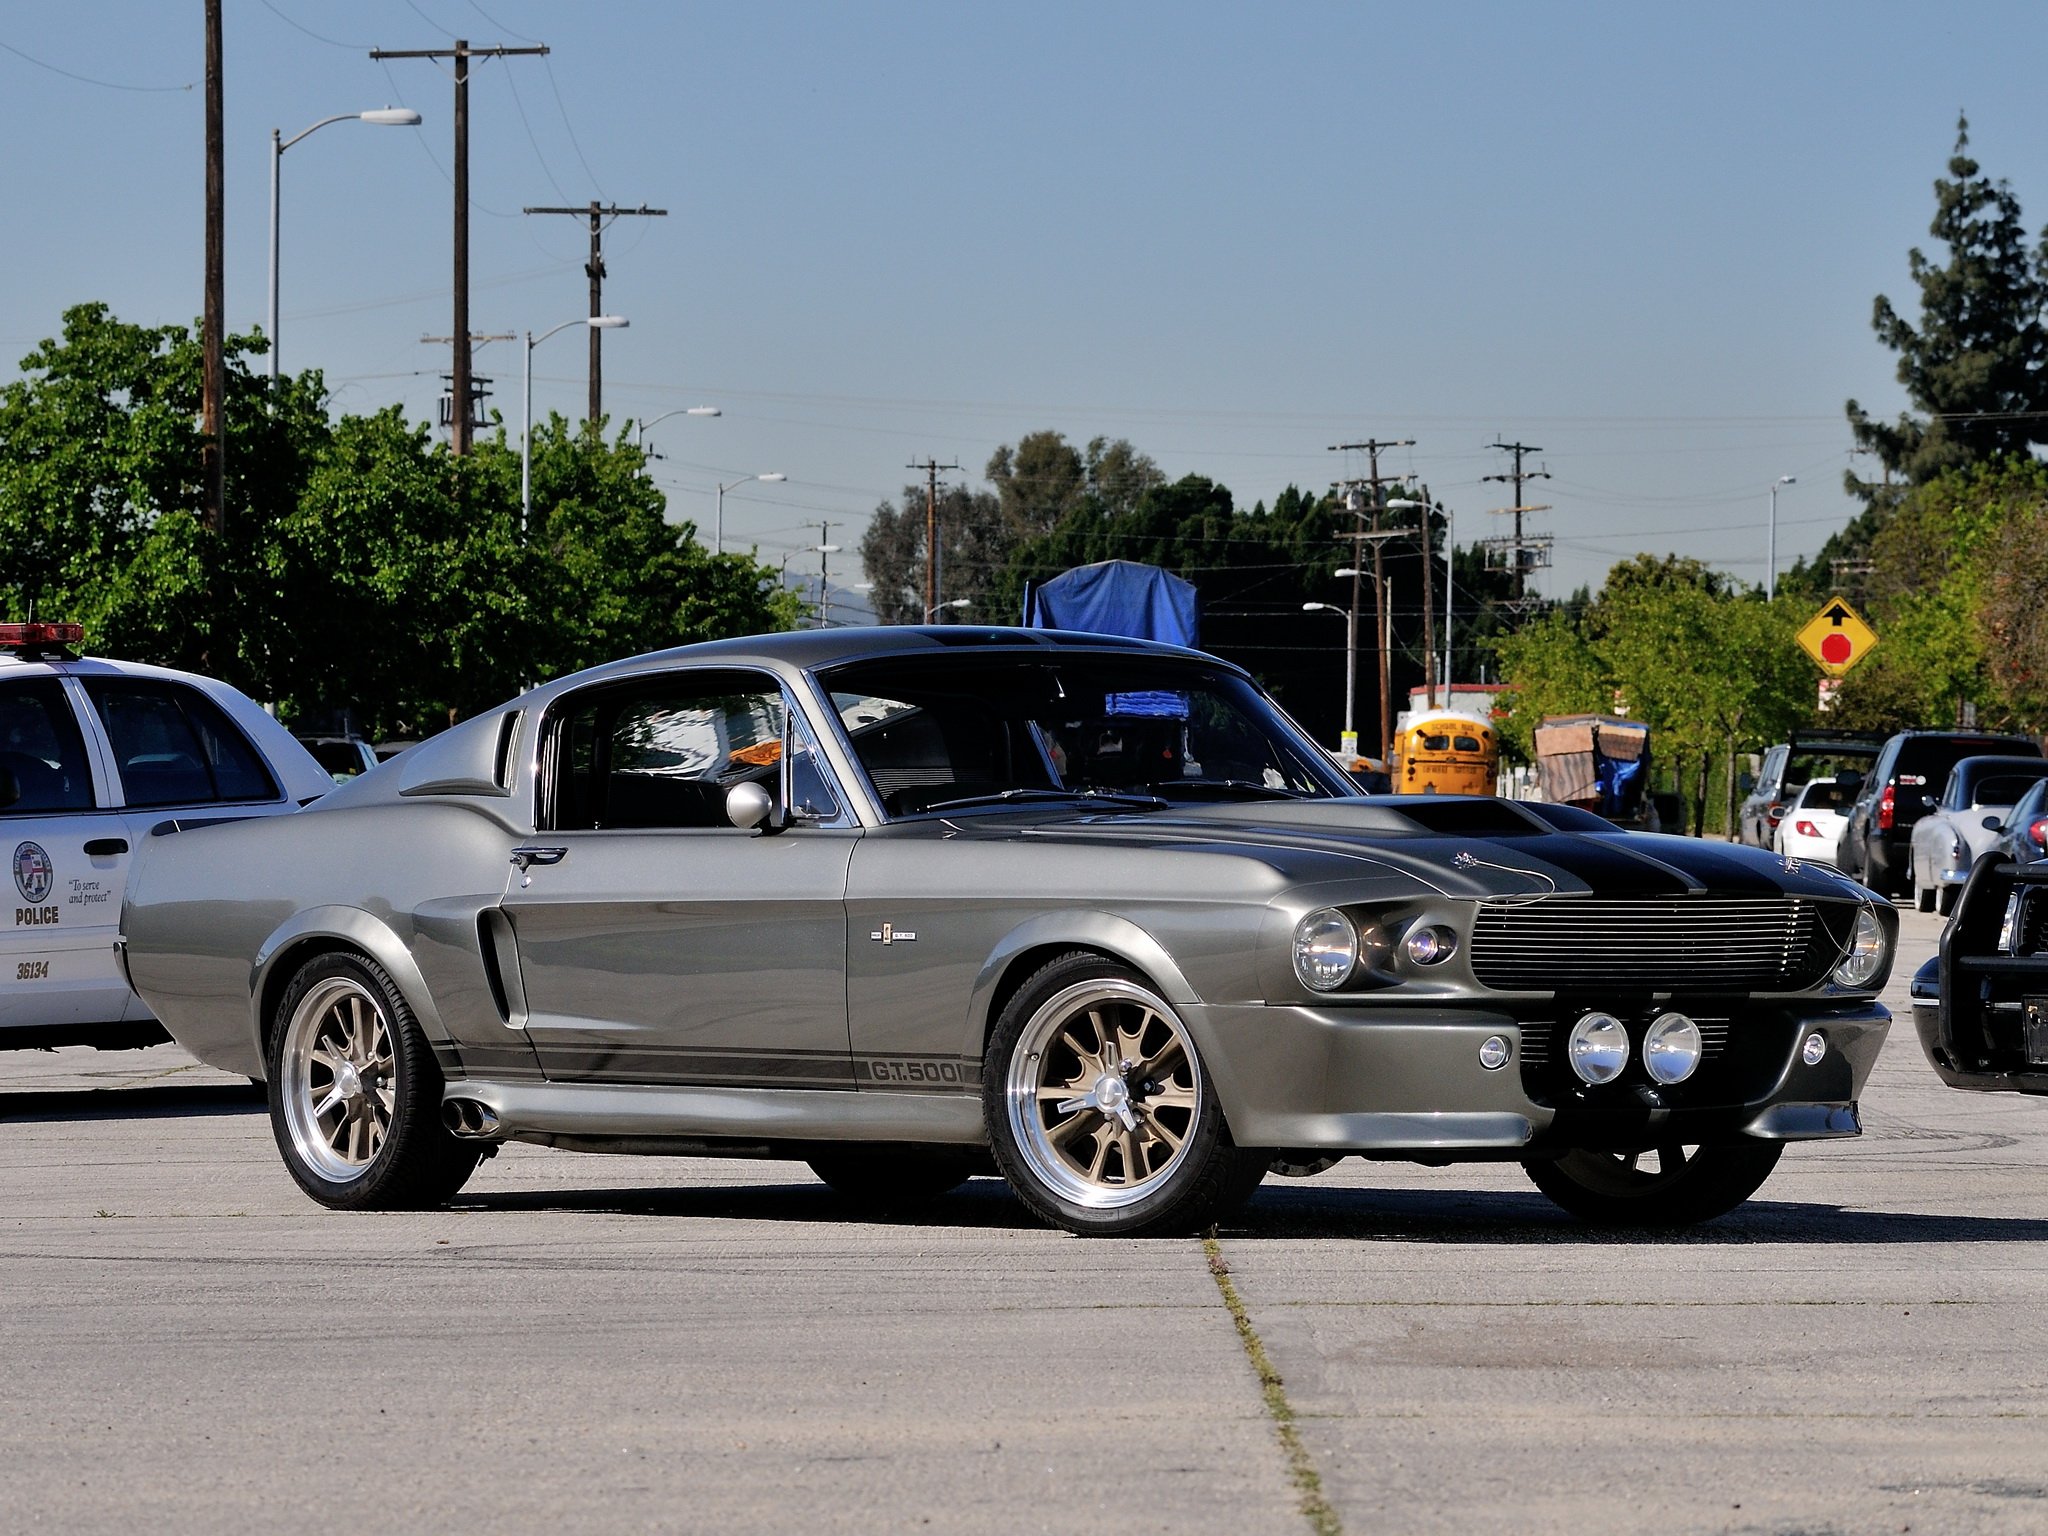 Ford Mustang Shelby Cobra Gt500 Eleanor Hot Rod Rods Muscle